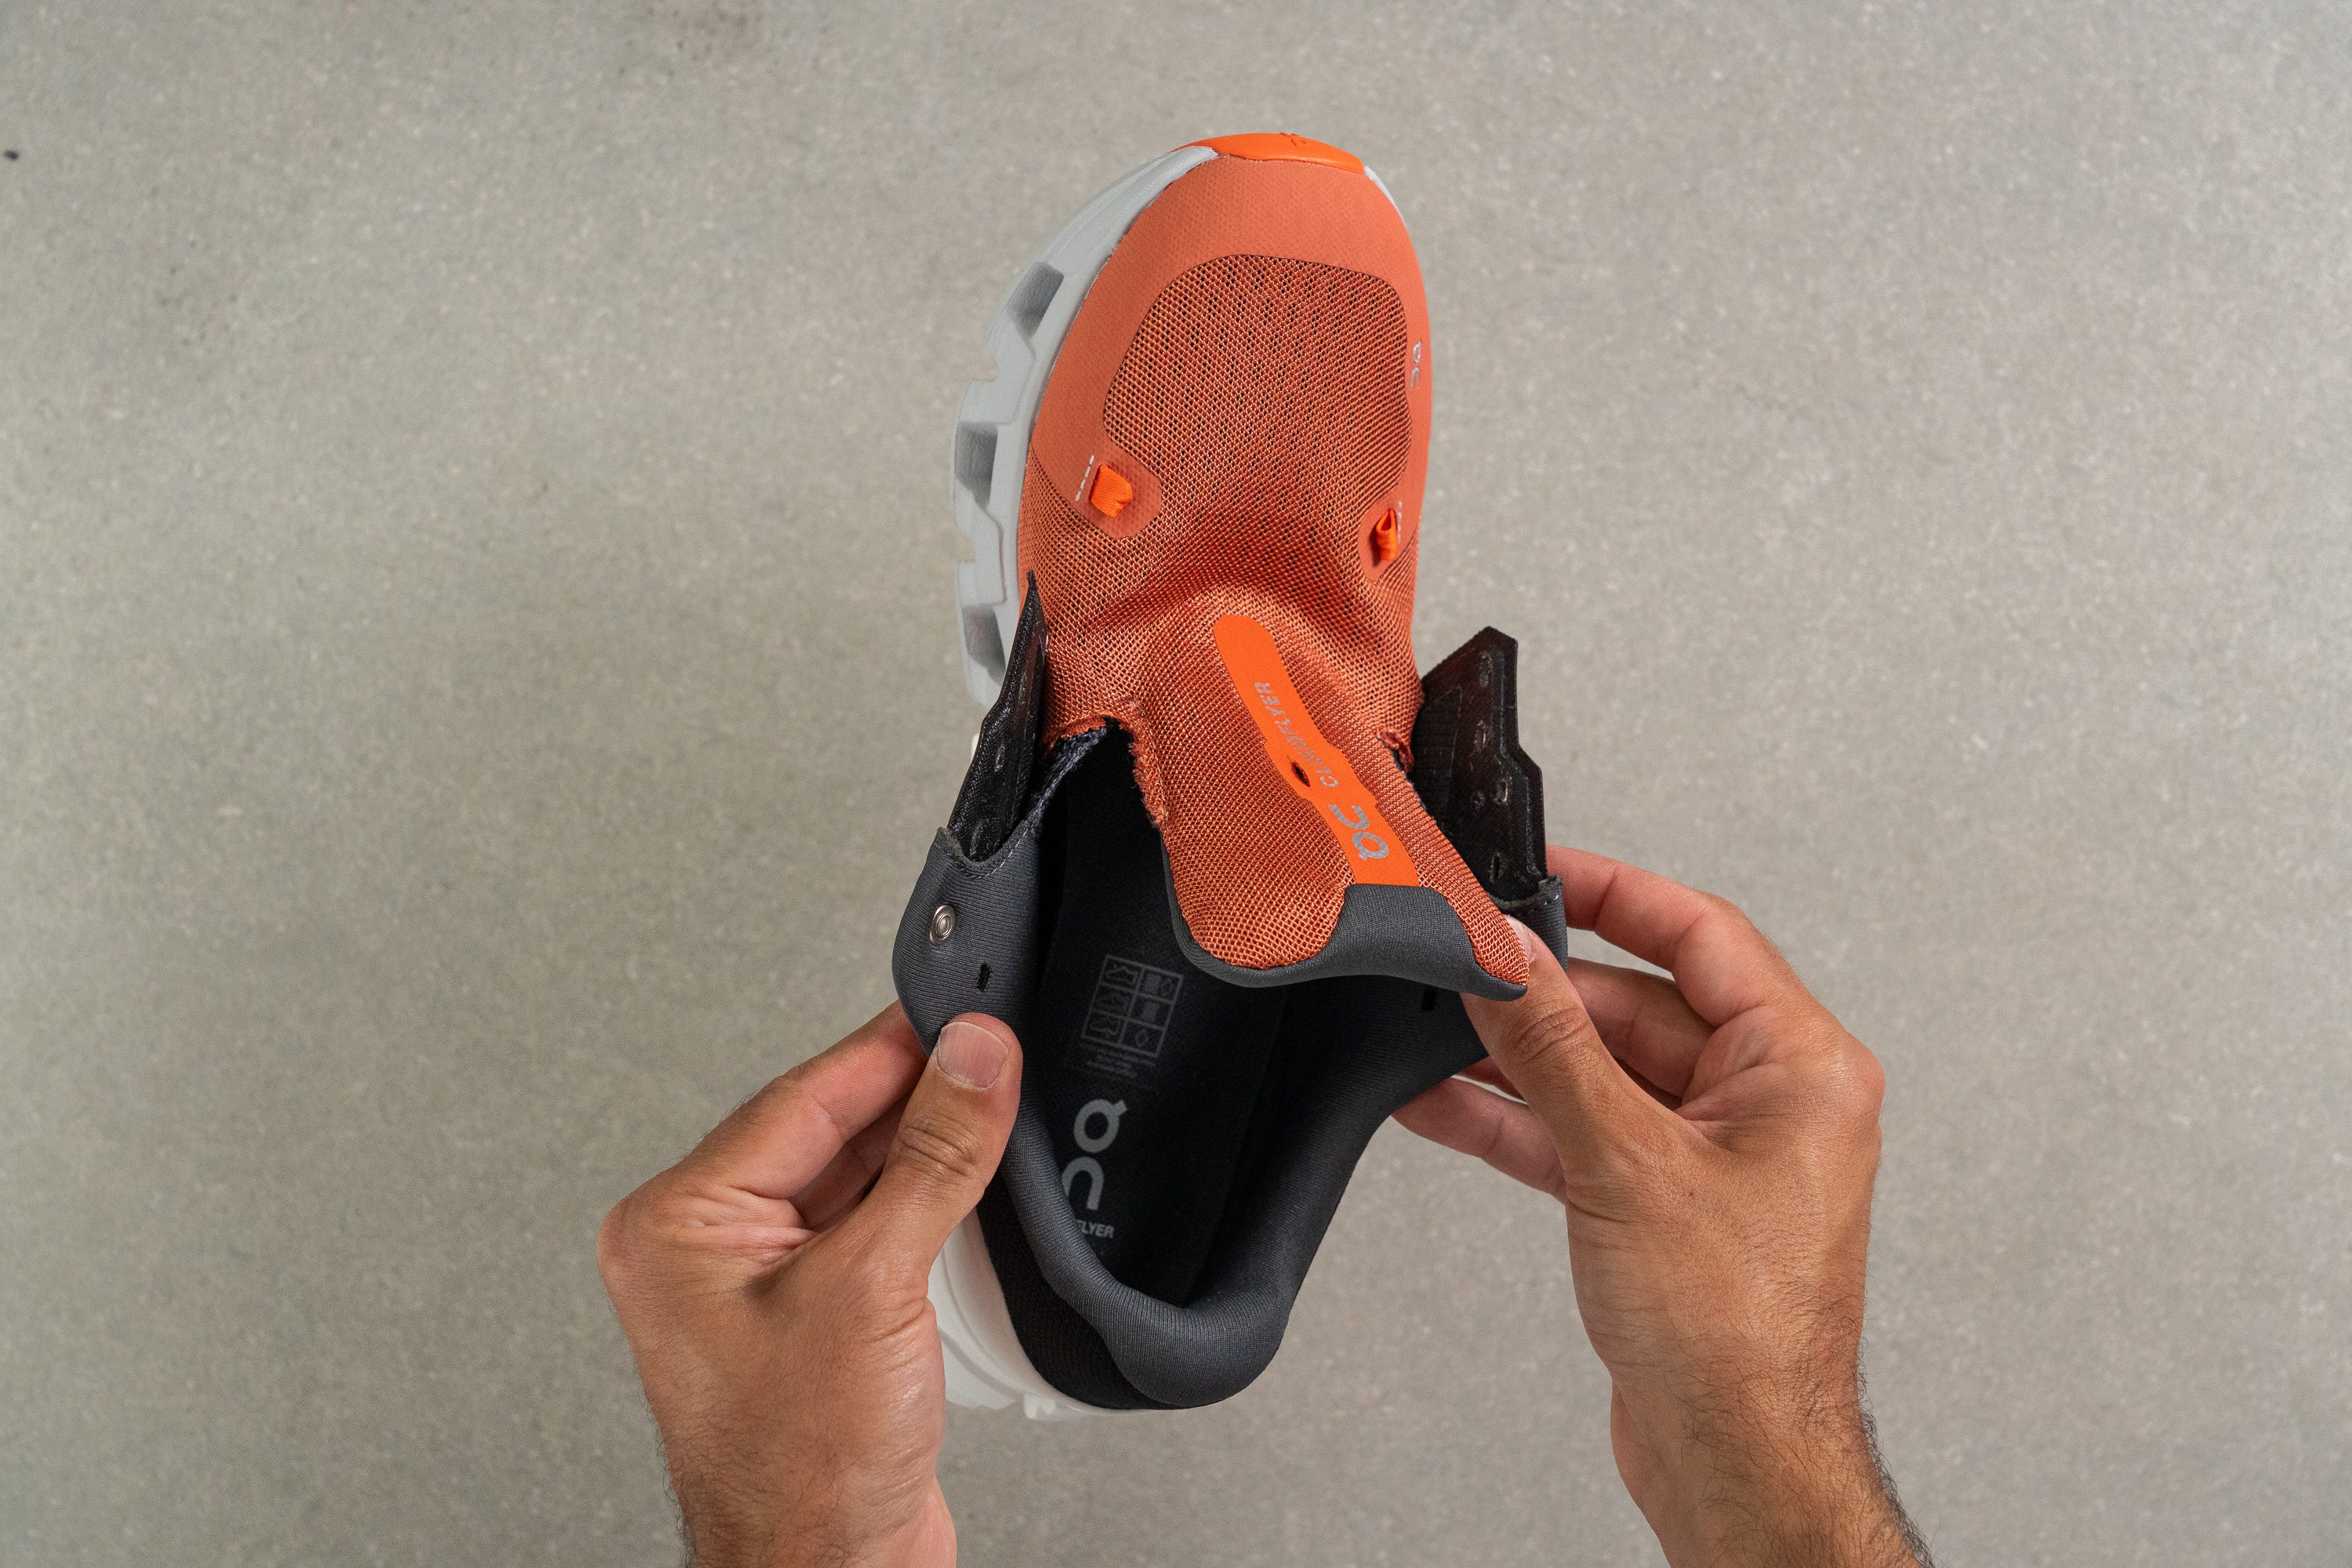 held up, we thought this shoe would be great for solid durability Could be lighter